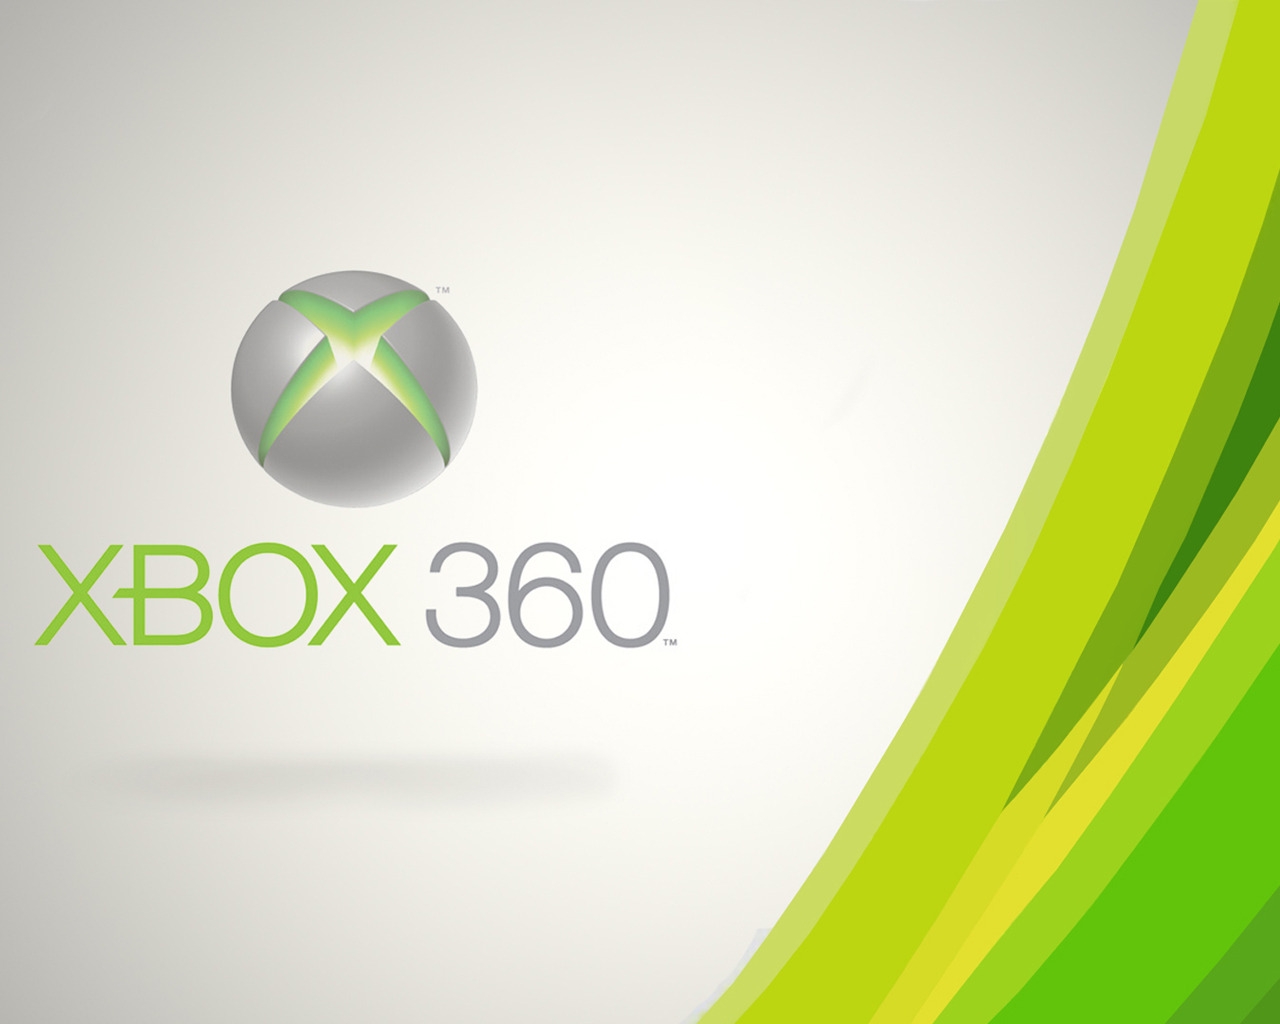 X-Box 360 for 1280 x 1024 resolution